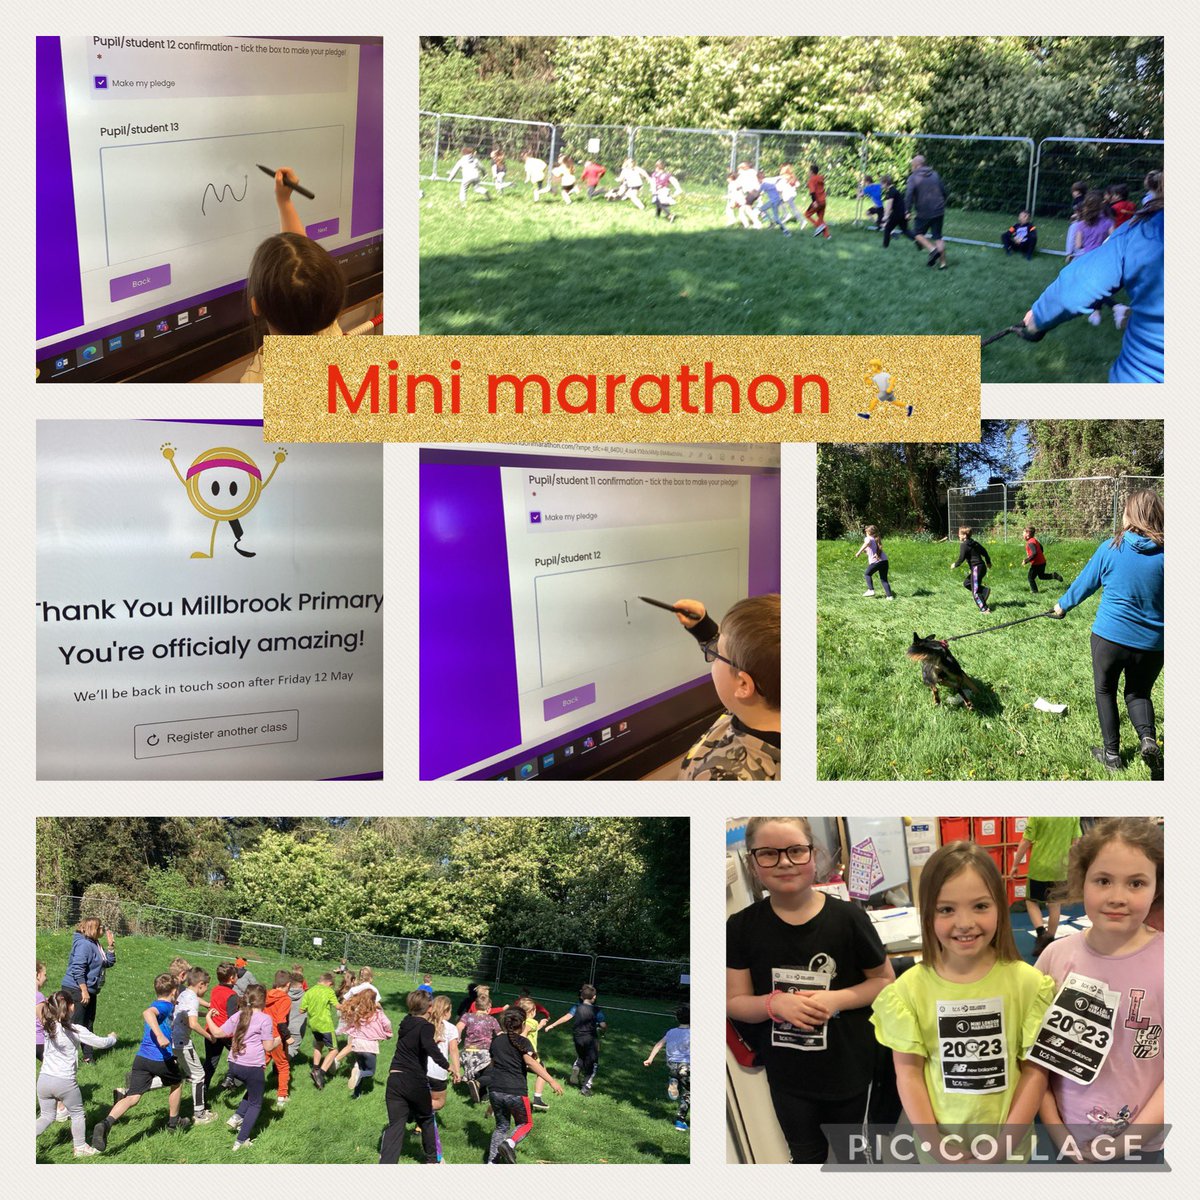 We loved taking part in the Guinness World Record attempt with our mini marathon today. #BeTheBestYou @KidneyWales @MBDeputyHead @MillbrookP #HealthyAndConfident #EthicallyInformed #AmbitiousAndCapable #TeamMB